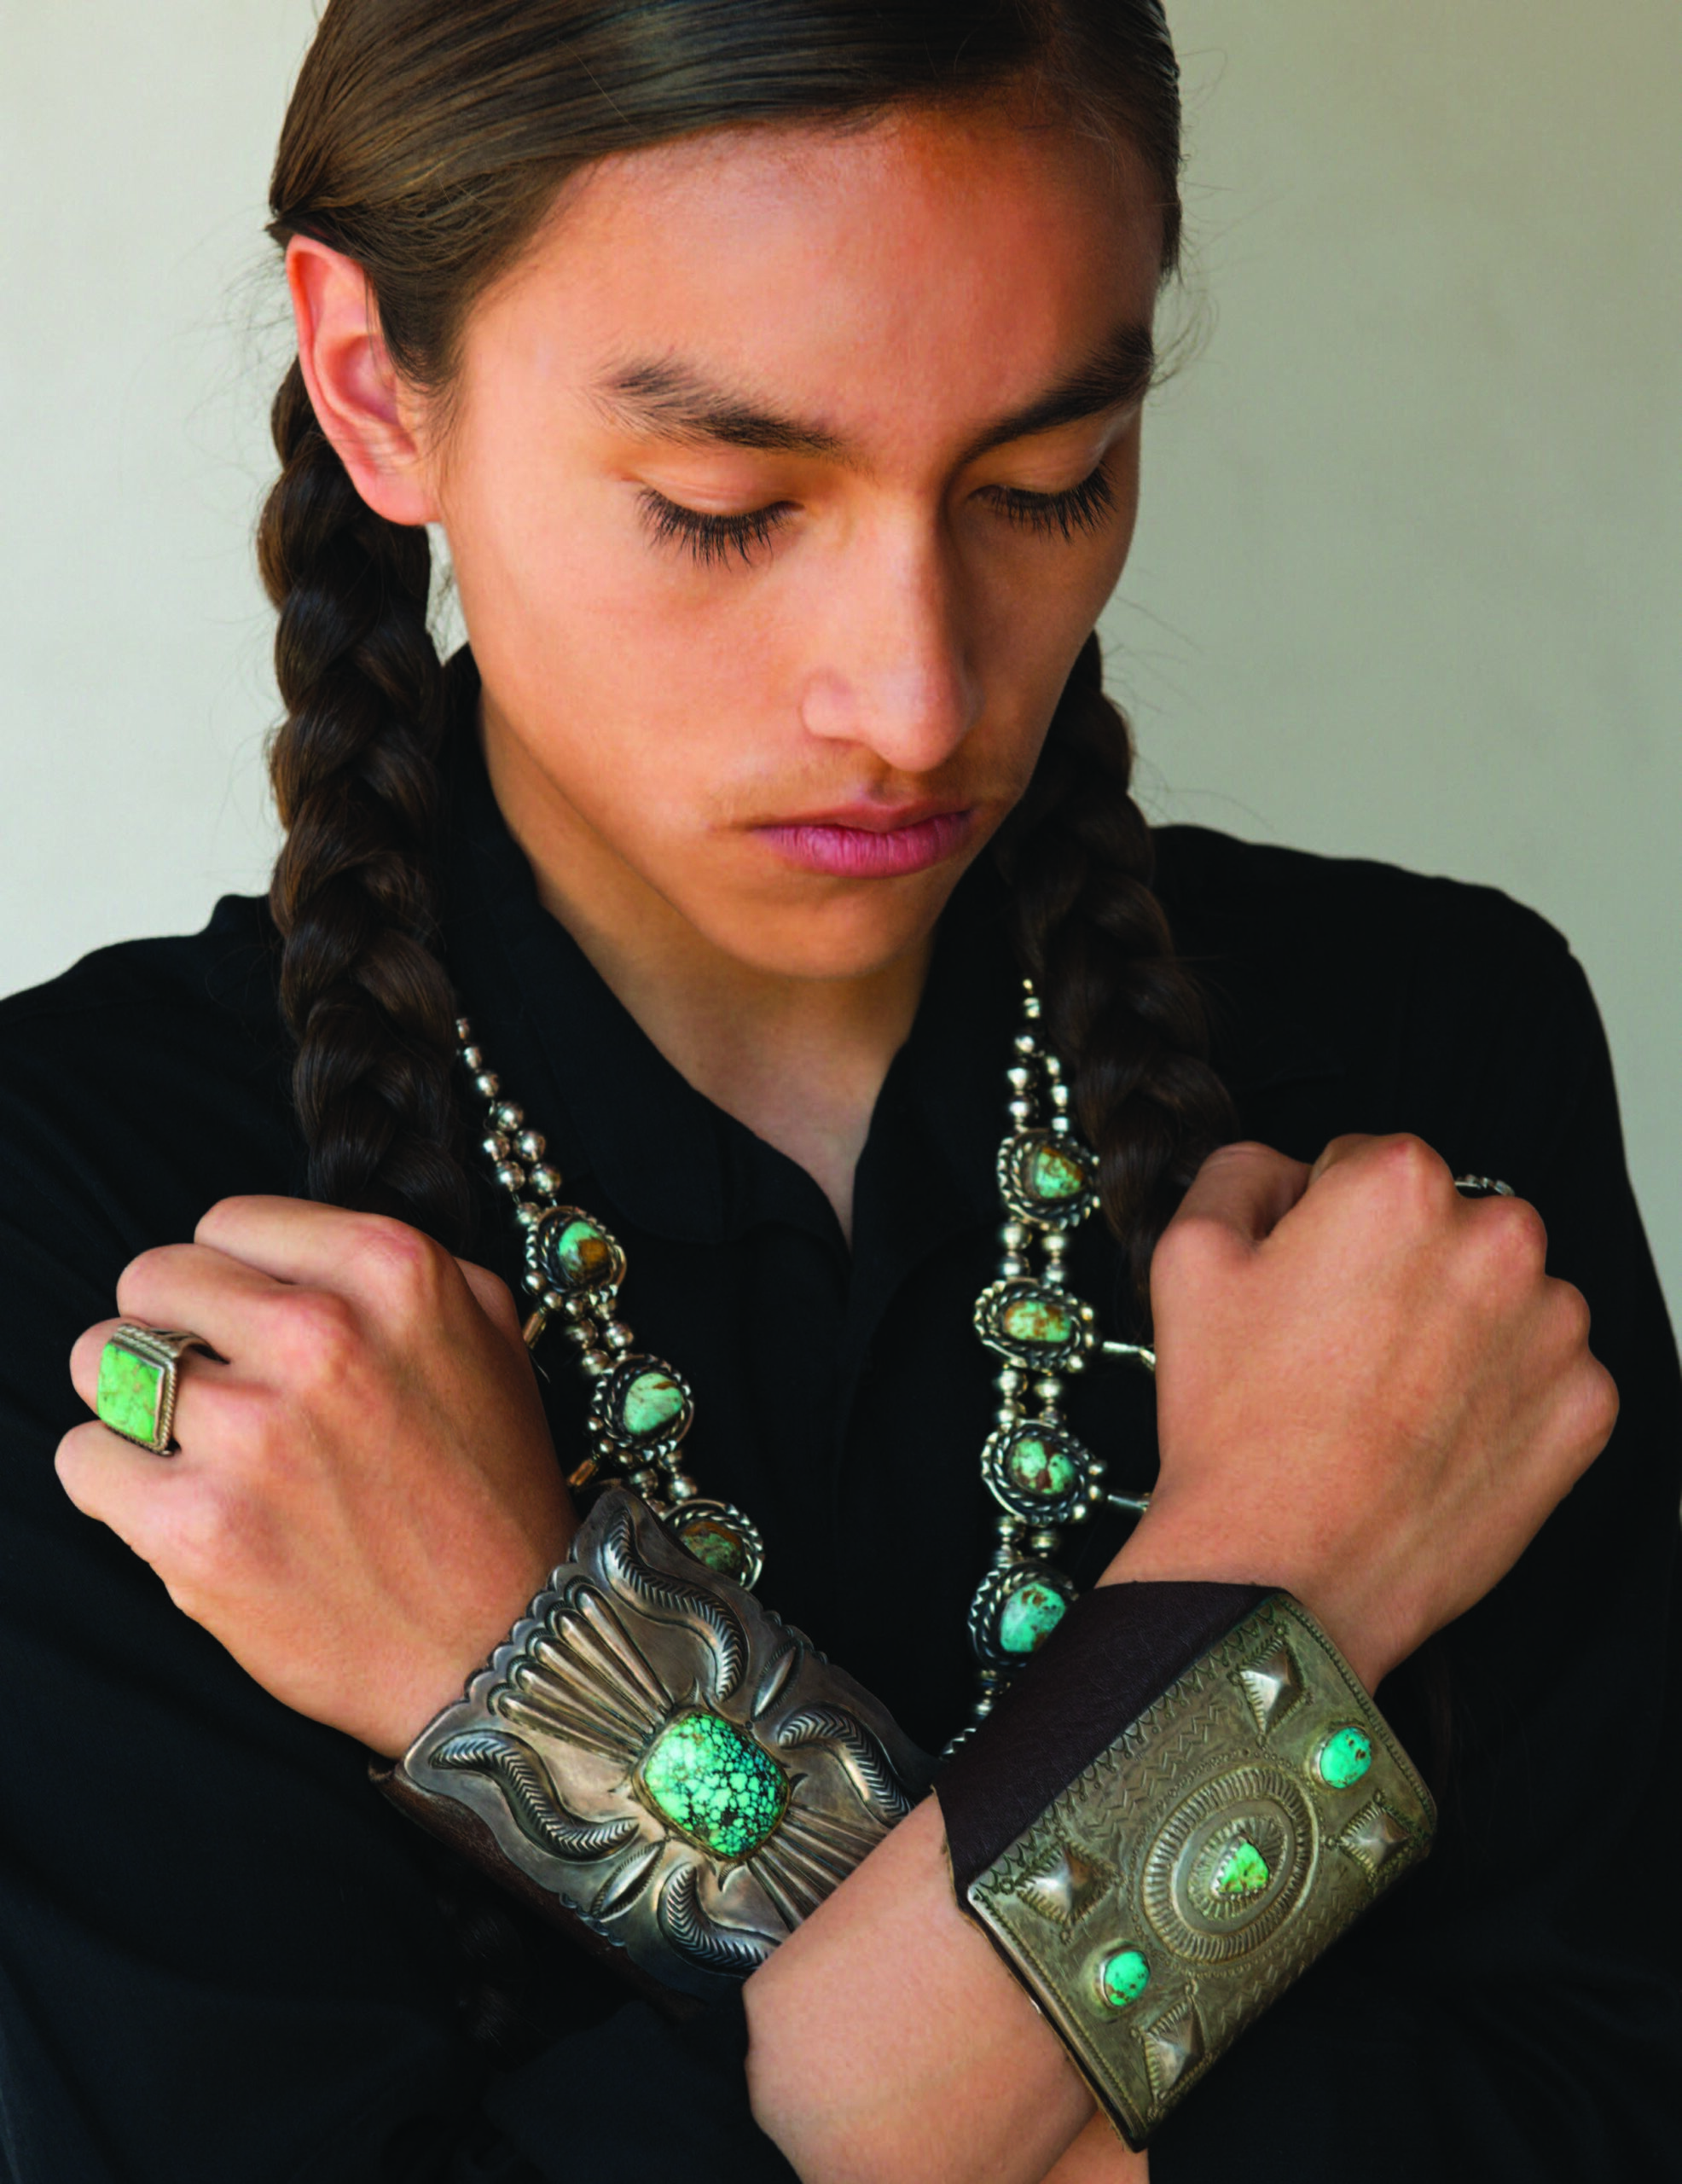 Phillip NoiseCat, with pieces from the exhibition. Large squash-blossom necklaces are often worn by men, as are ketohs (bow guards), which historically protected archers from string spring-back but today are considered jewelry items akin to bracelets. The ketoh with the square cabochon, made by Luther Aguilar, Santo Domingo, features a wonderful turquoise stone with “spiderweb” style matrix. The ketoh with three stones is Navajo, donated in 1939. Photo by Kitty Leaken.